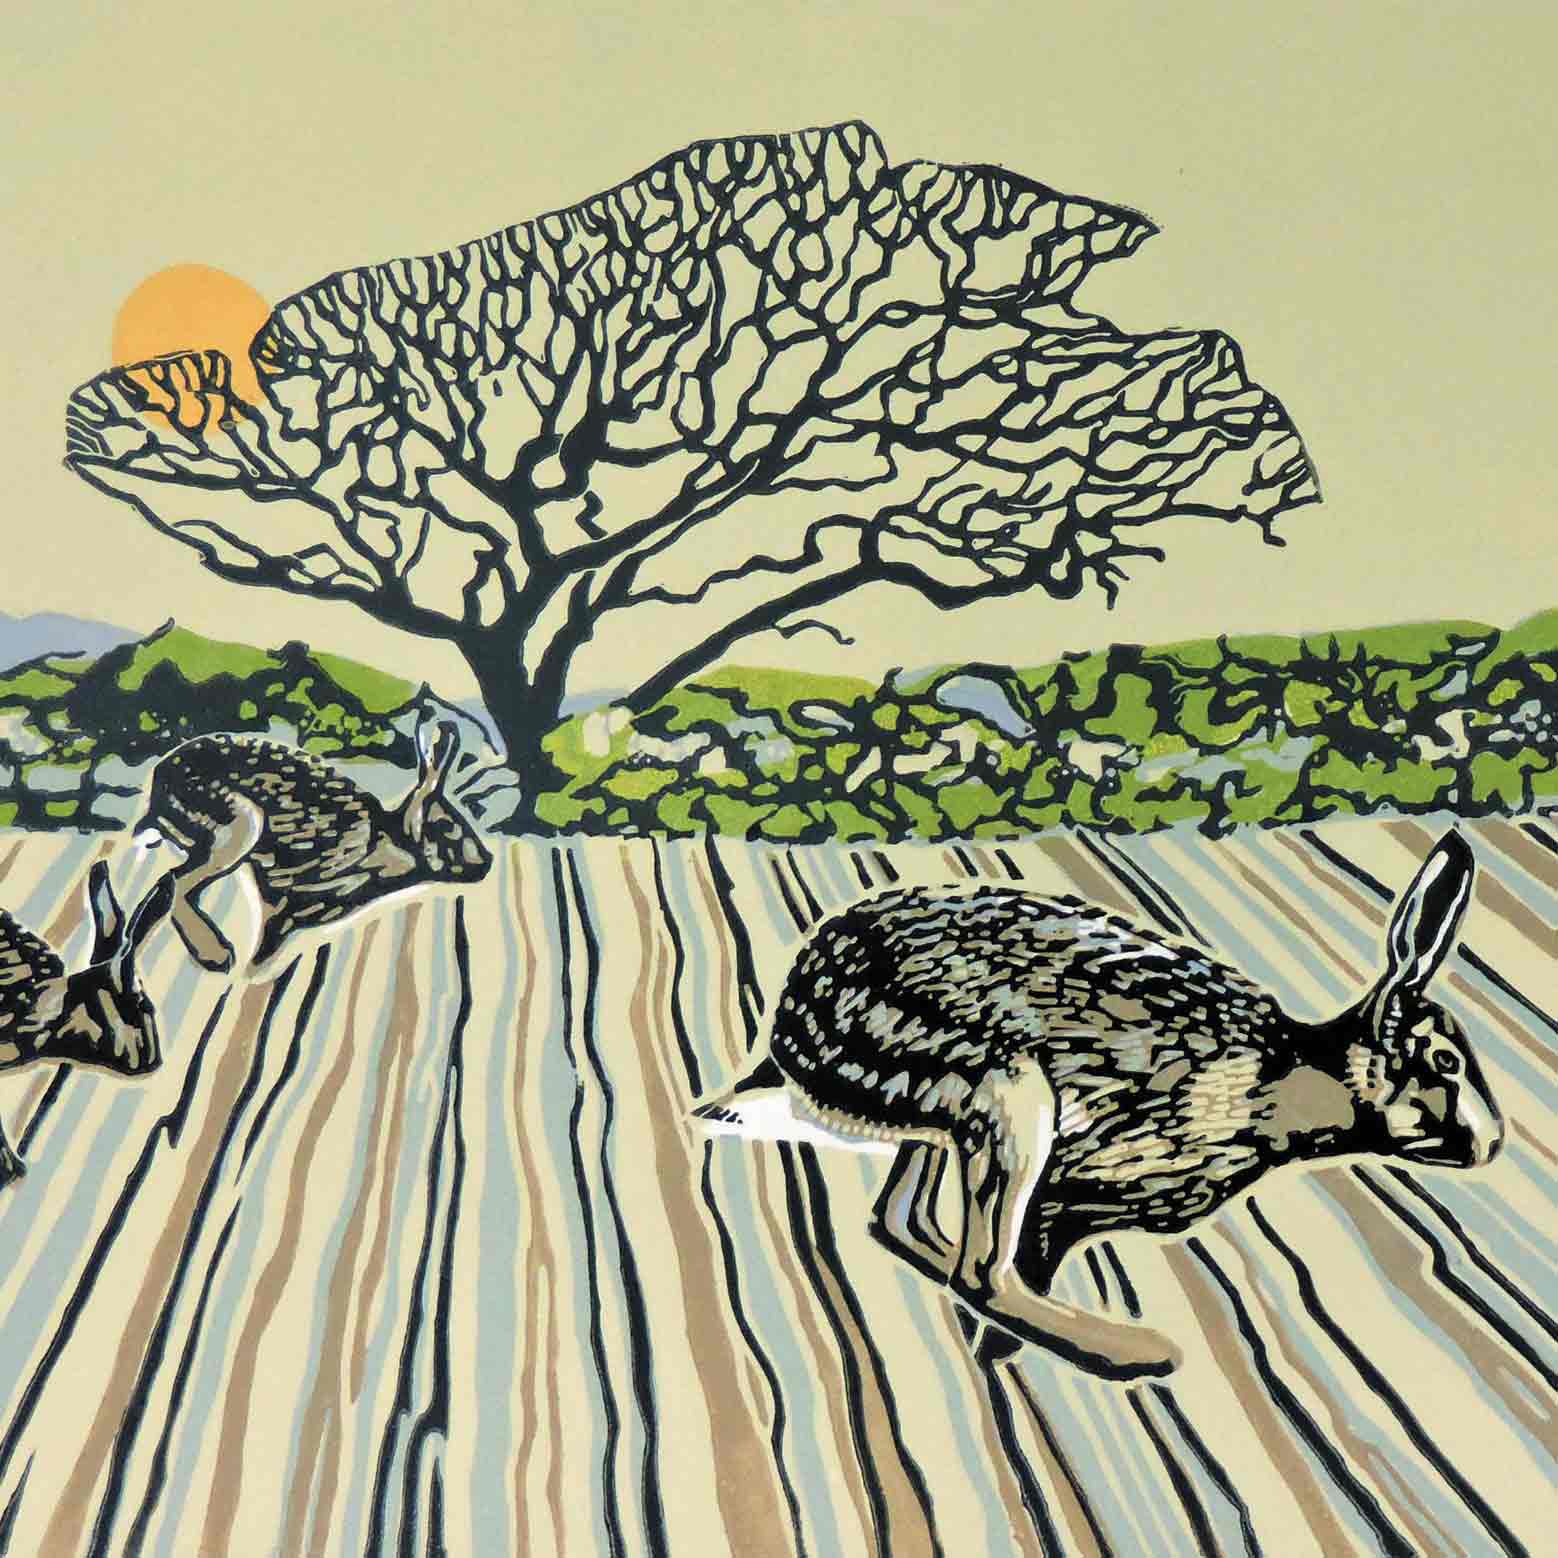 Art Greeting Card by Max Angus, Alexander and the Racing Hares, Linocut, Hares running over field